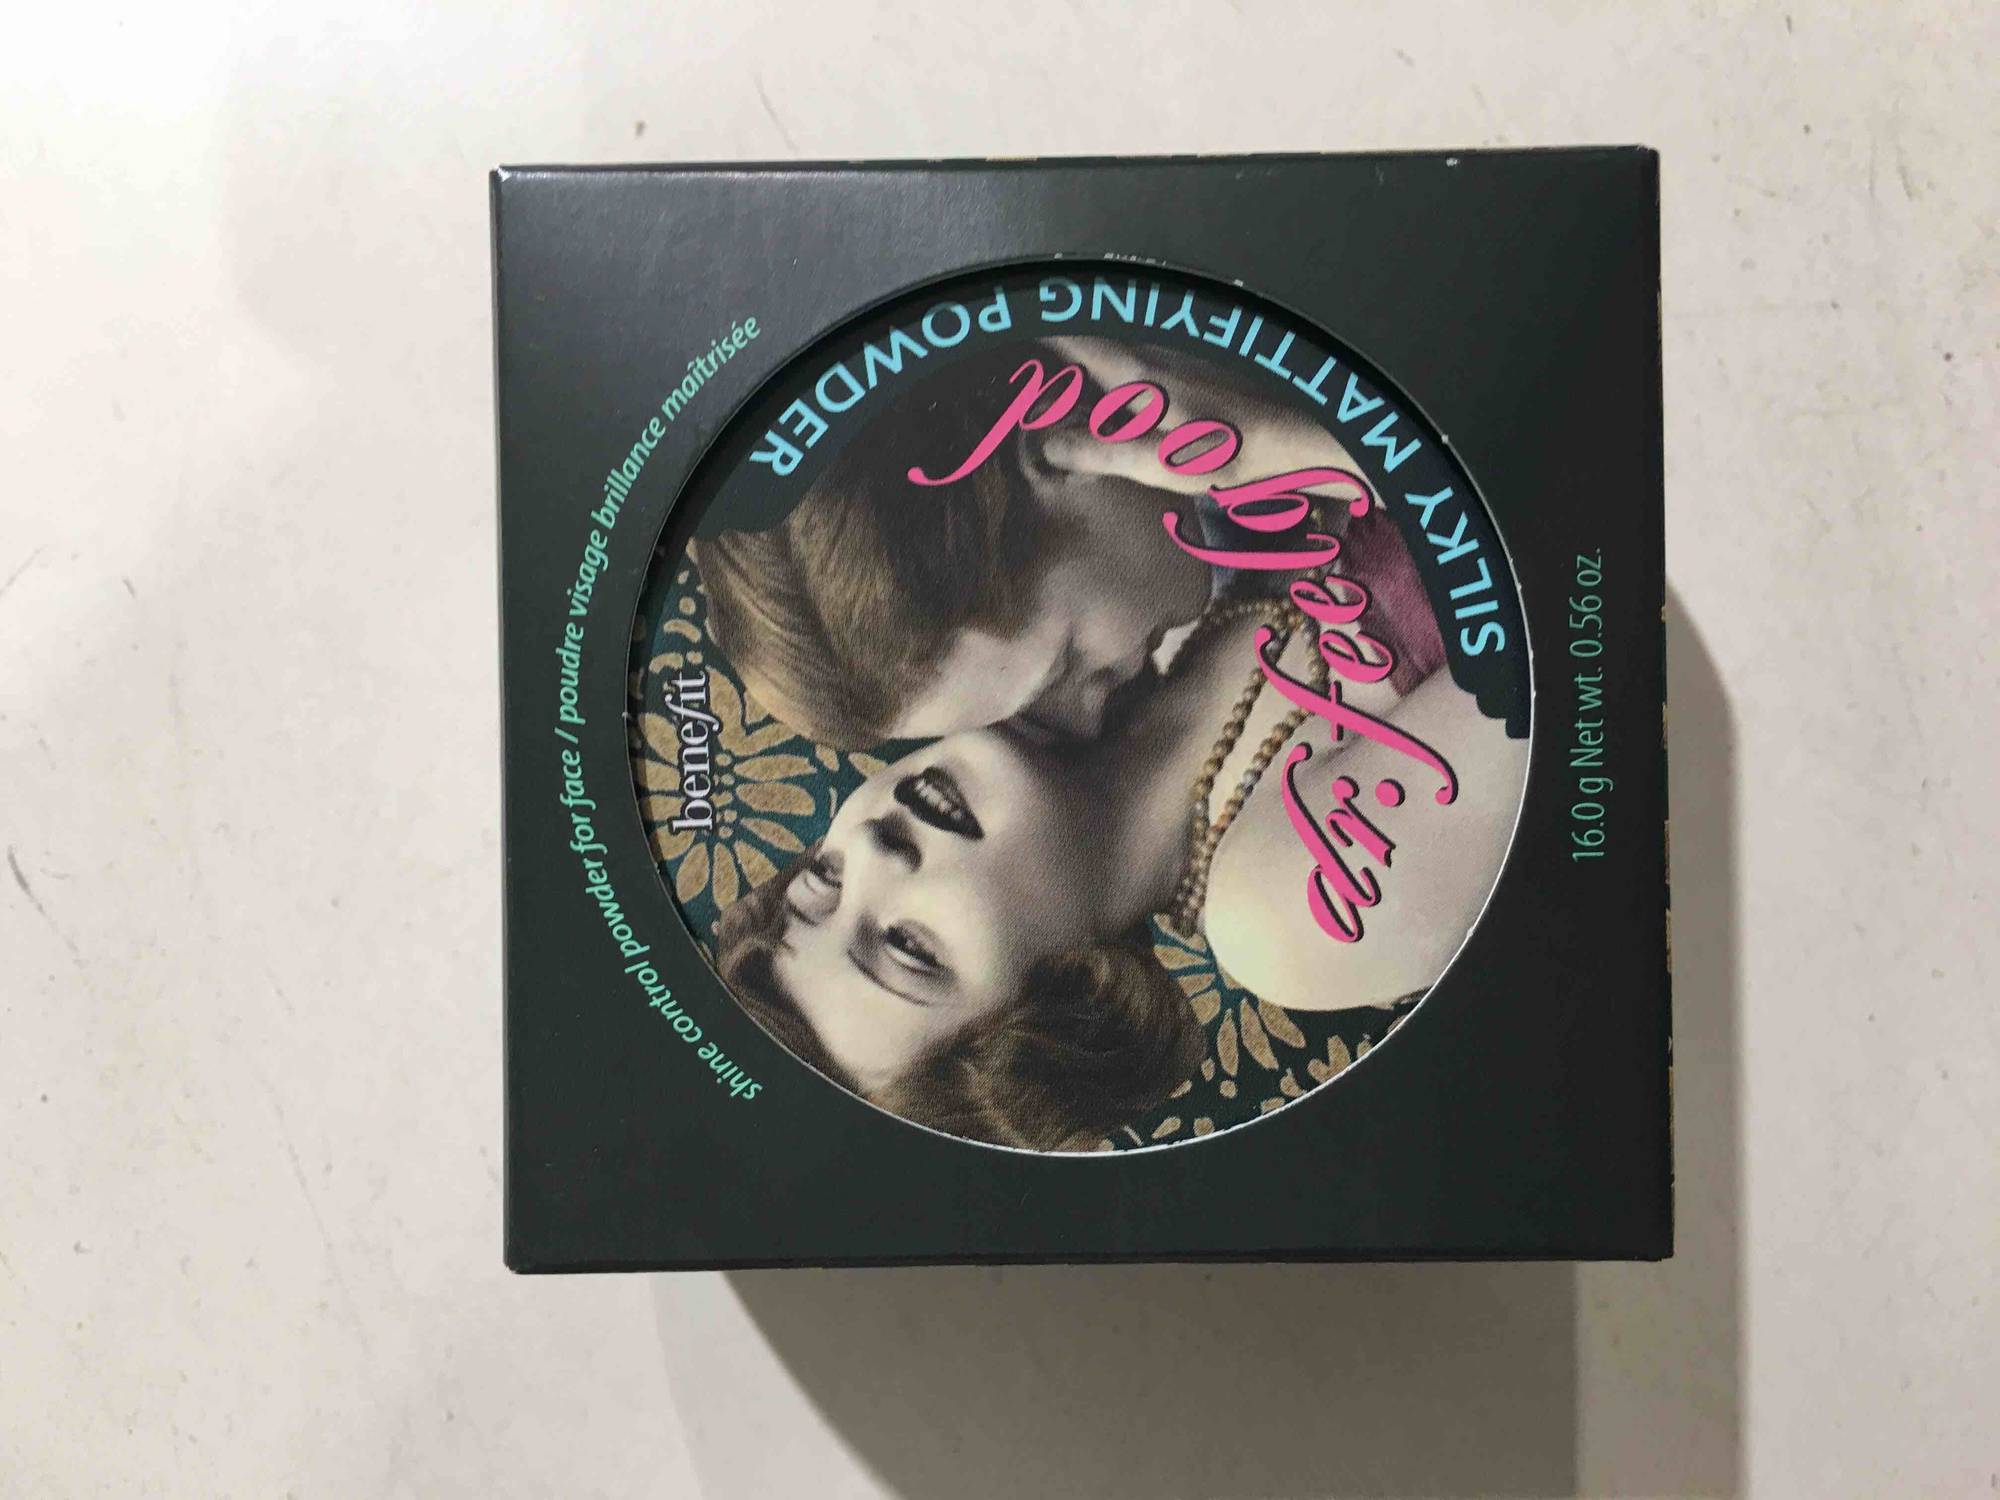 BENEFIT - Dr. feelgood - Silky matifying powder